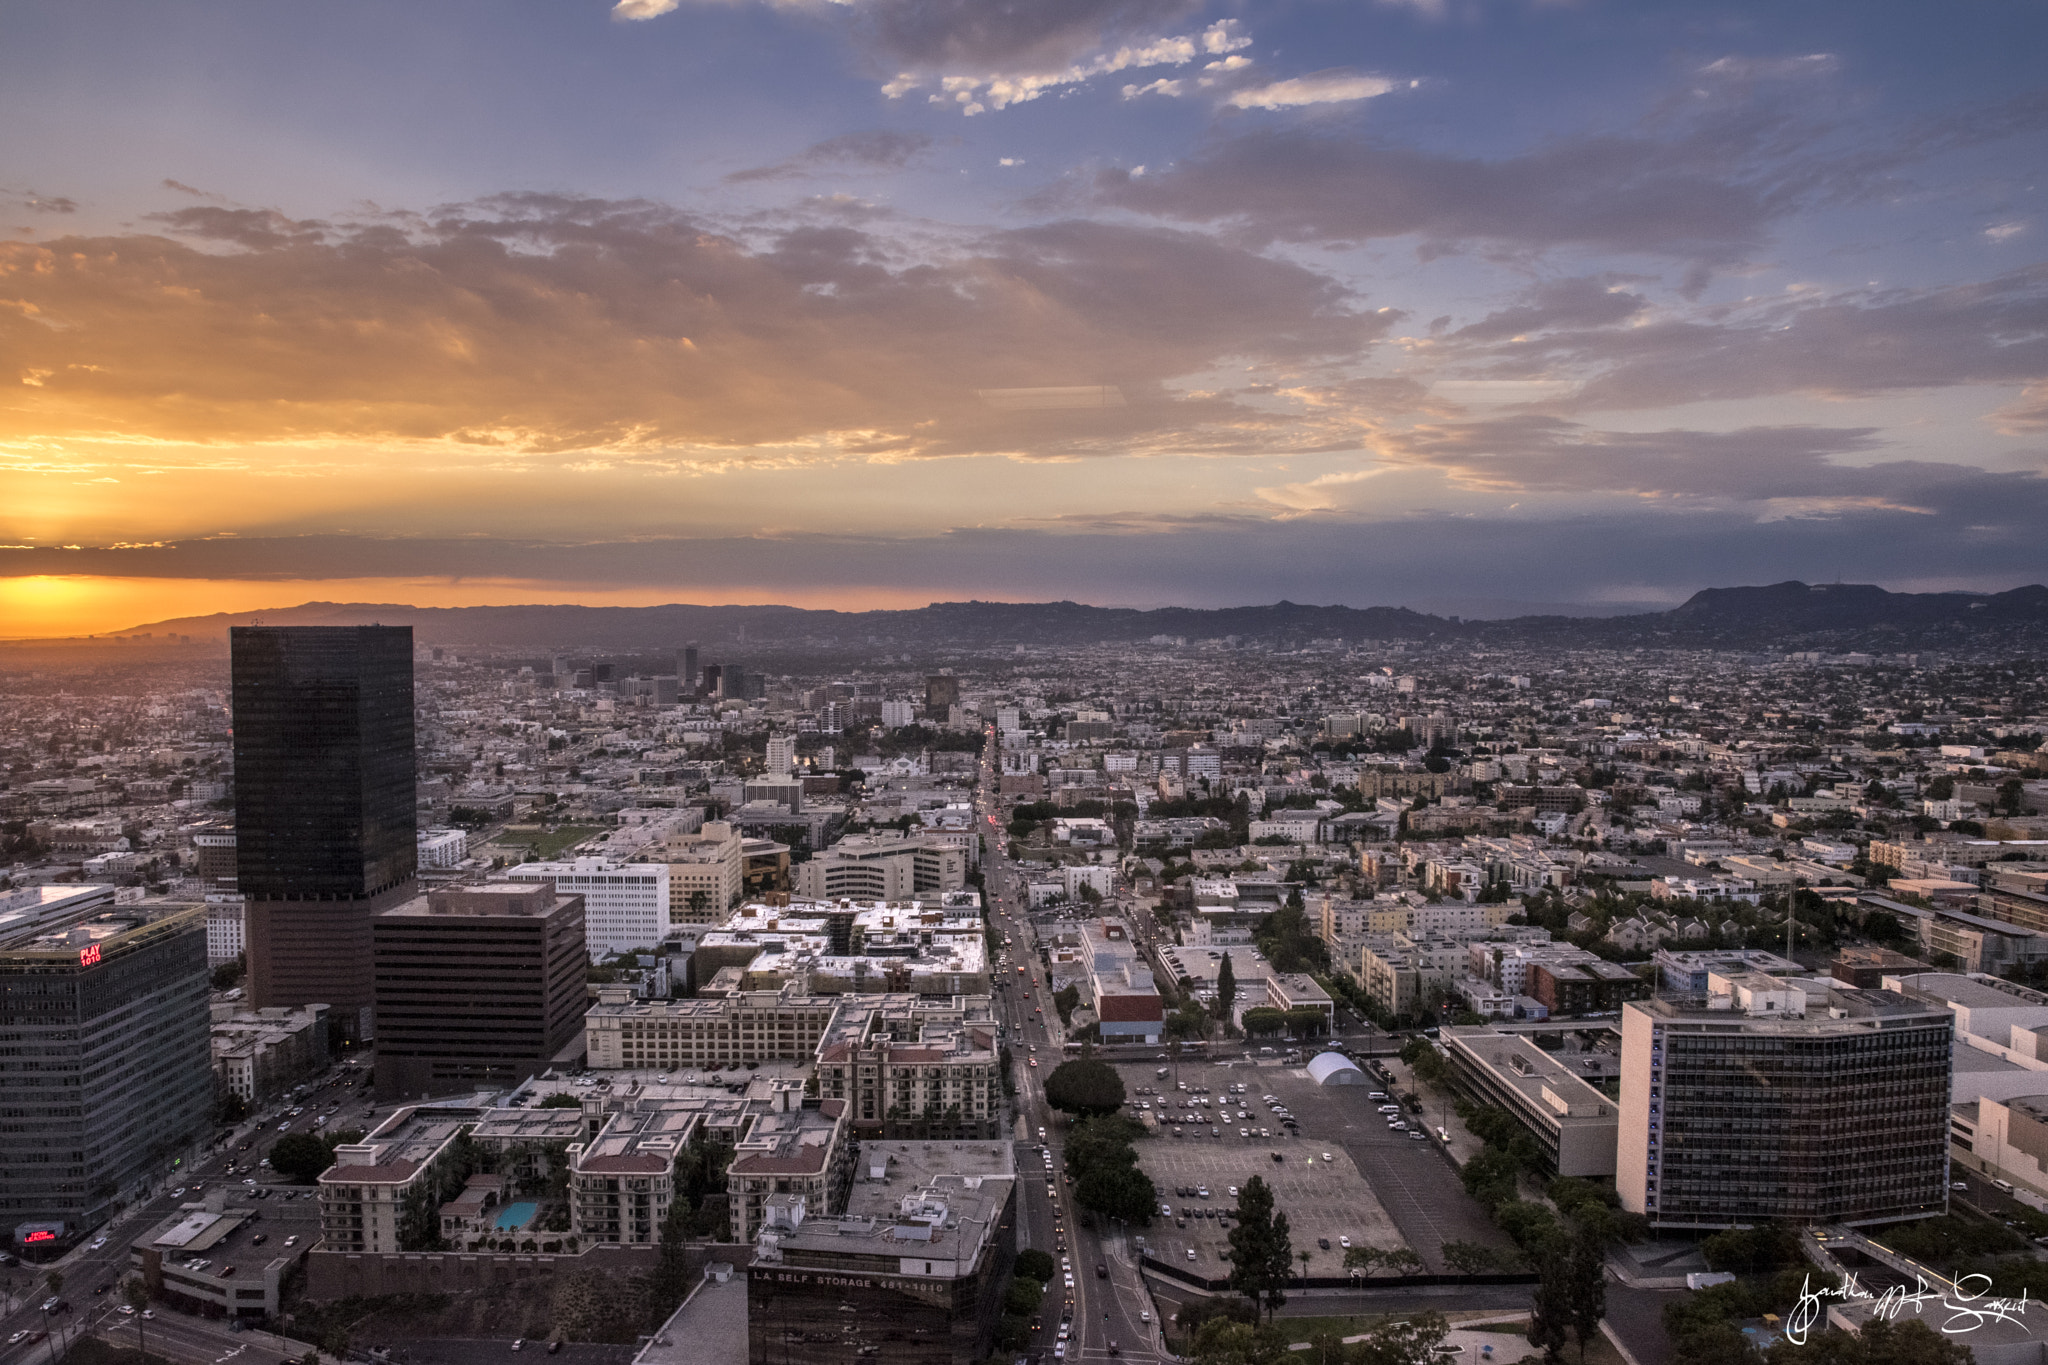 Nikon D5500 + Sigma 17-70mm F2.8-4 DC Macro OS HSM | C sample photo. Sunset from the top of downtown la photography